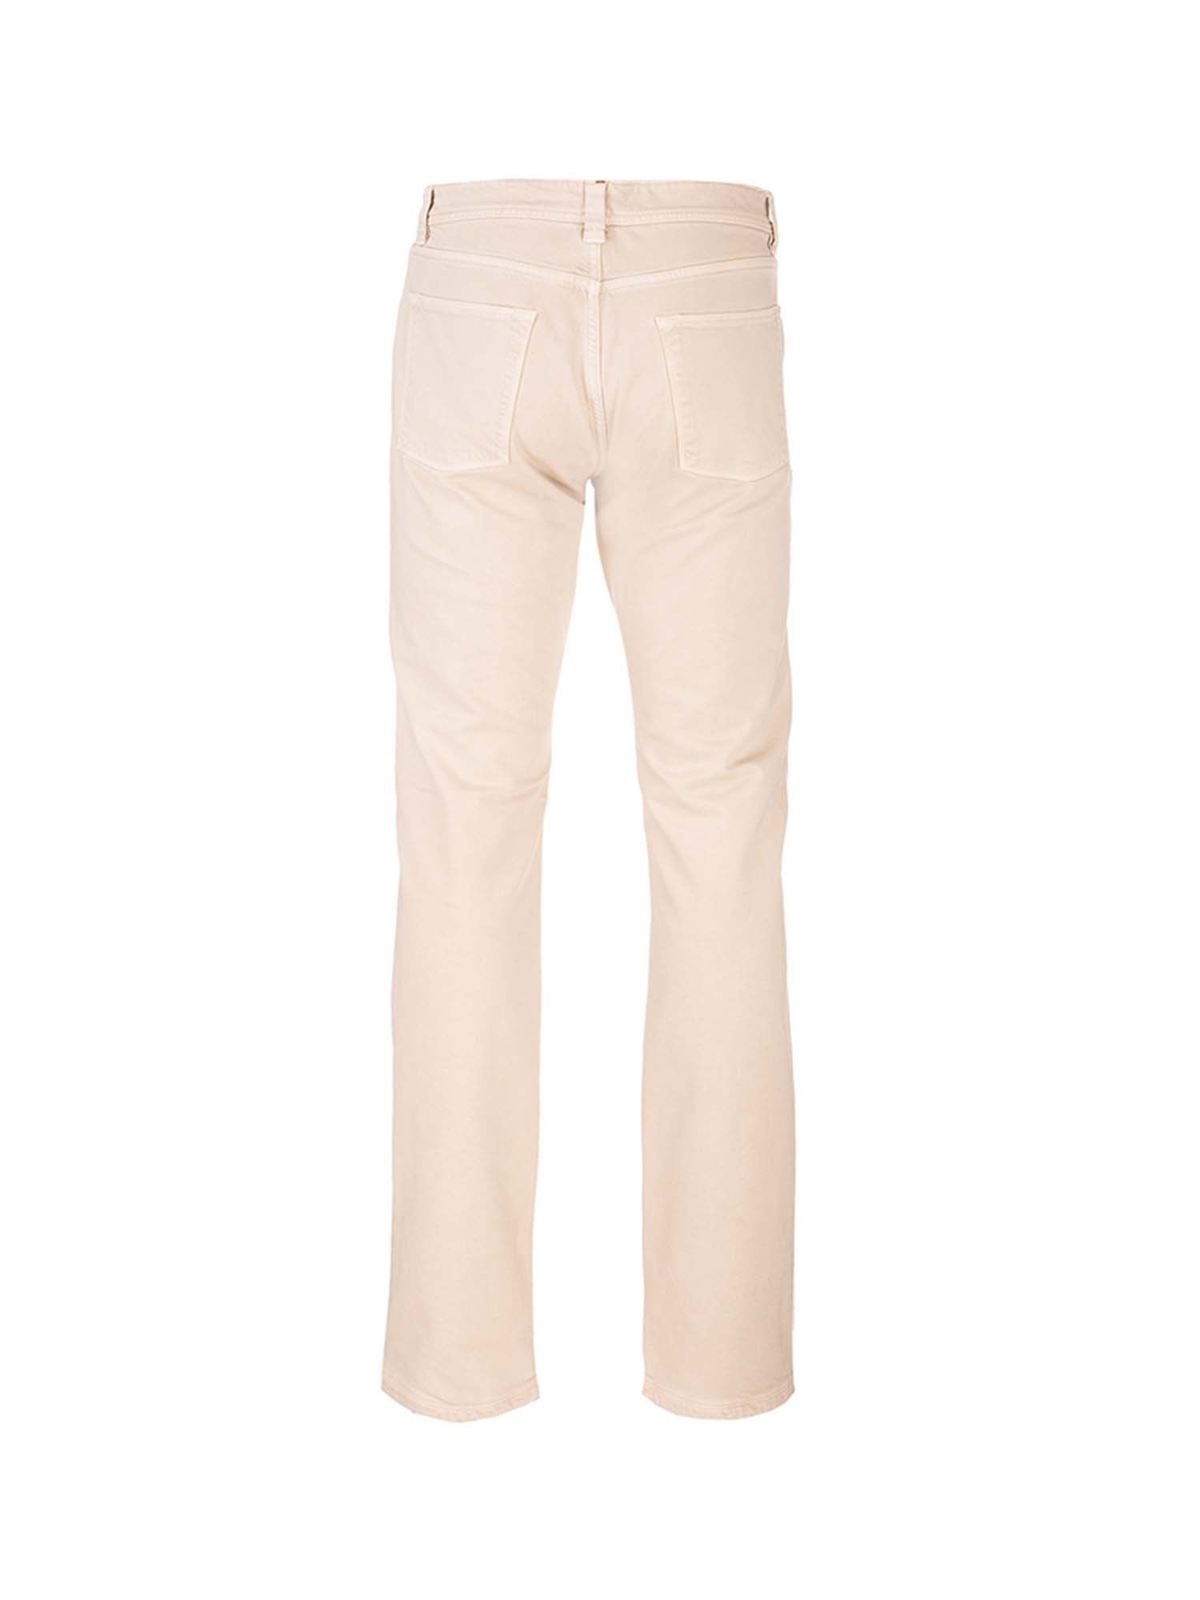 AND Girl Trousers  Buy AND Girl Red Winter Trousers Online  Nykaa Fashion